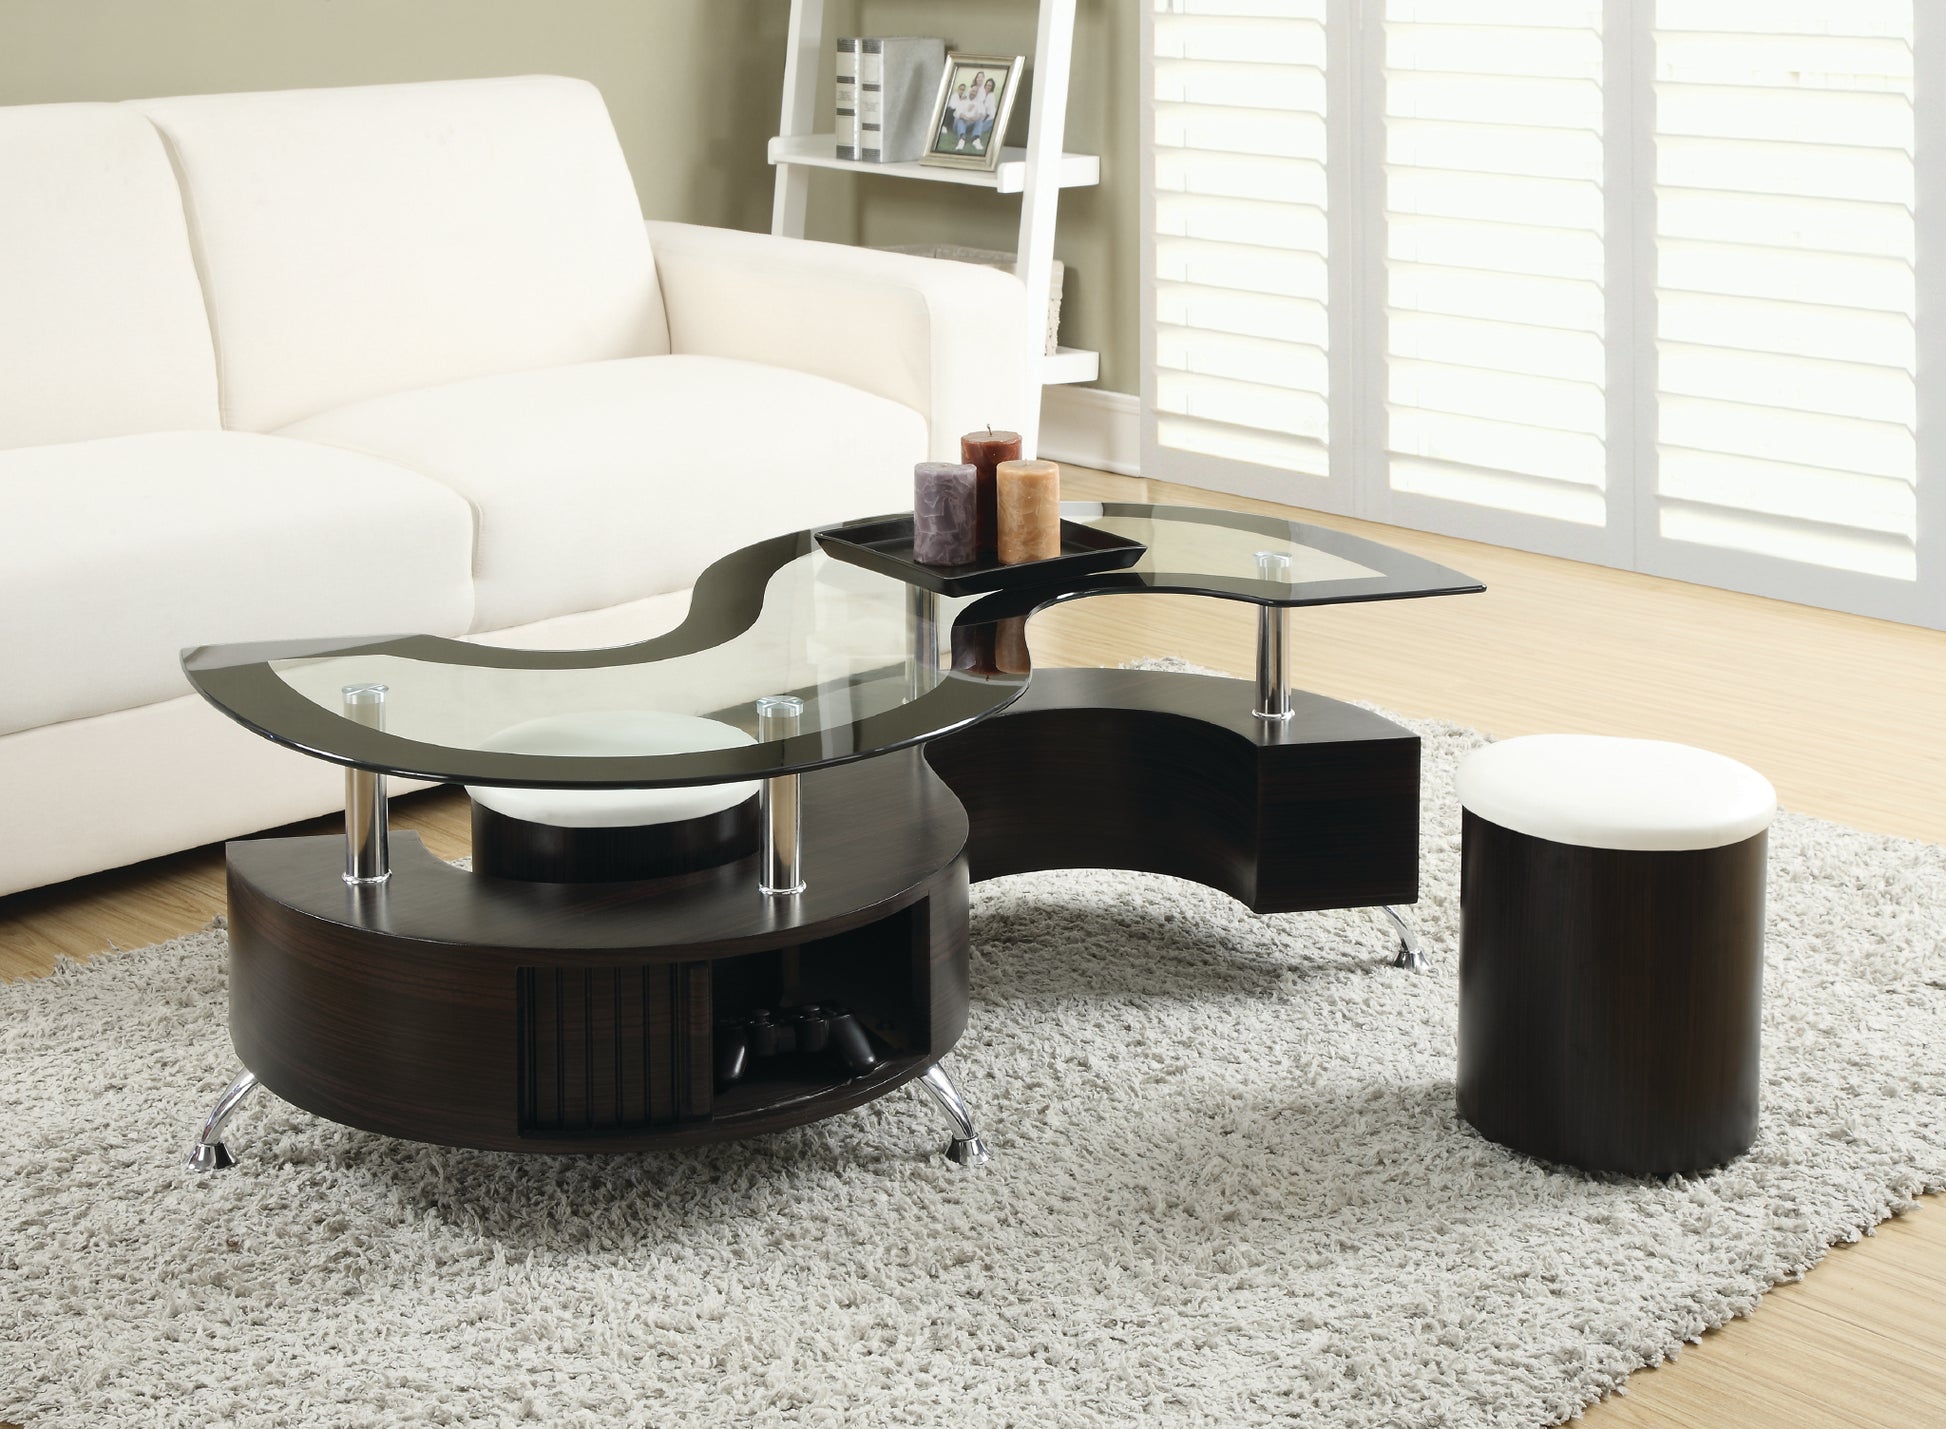 TS7902 - Coffee Table with Stools